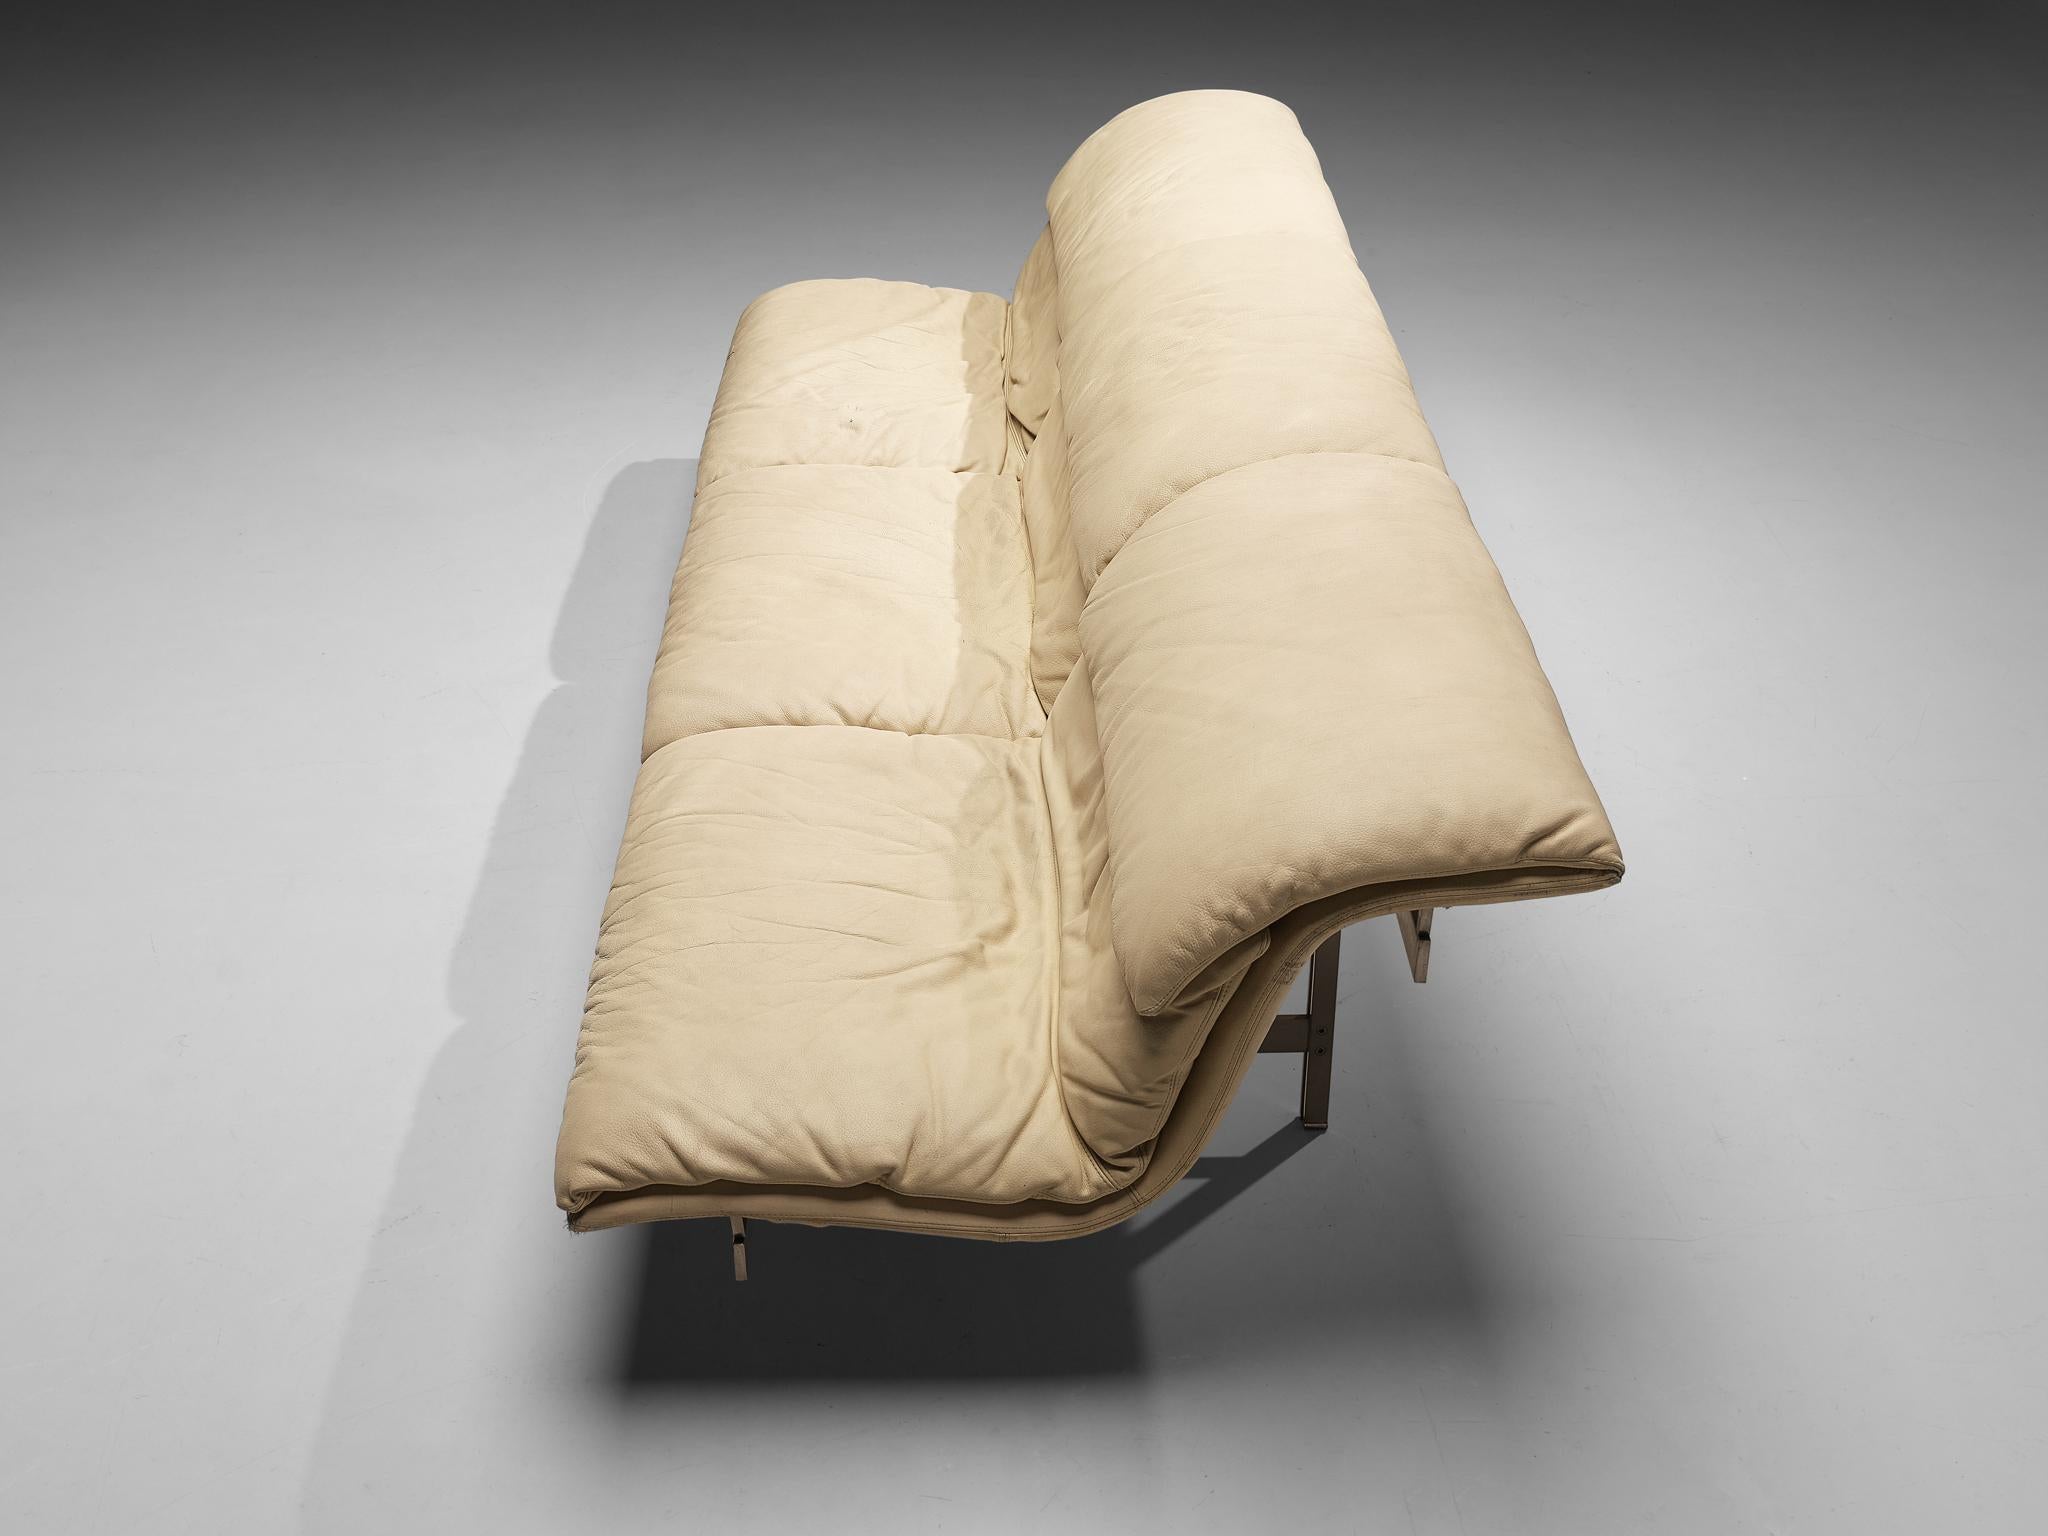 Steel Giovanni Offredi for Saporit 'Wave' Sofa in Beige Leather 